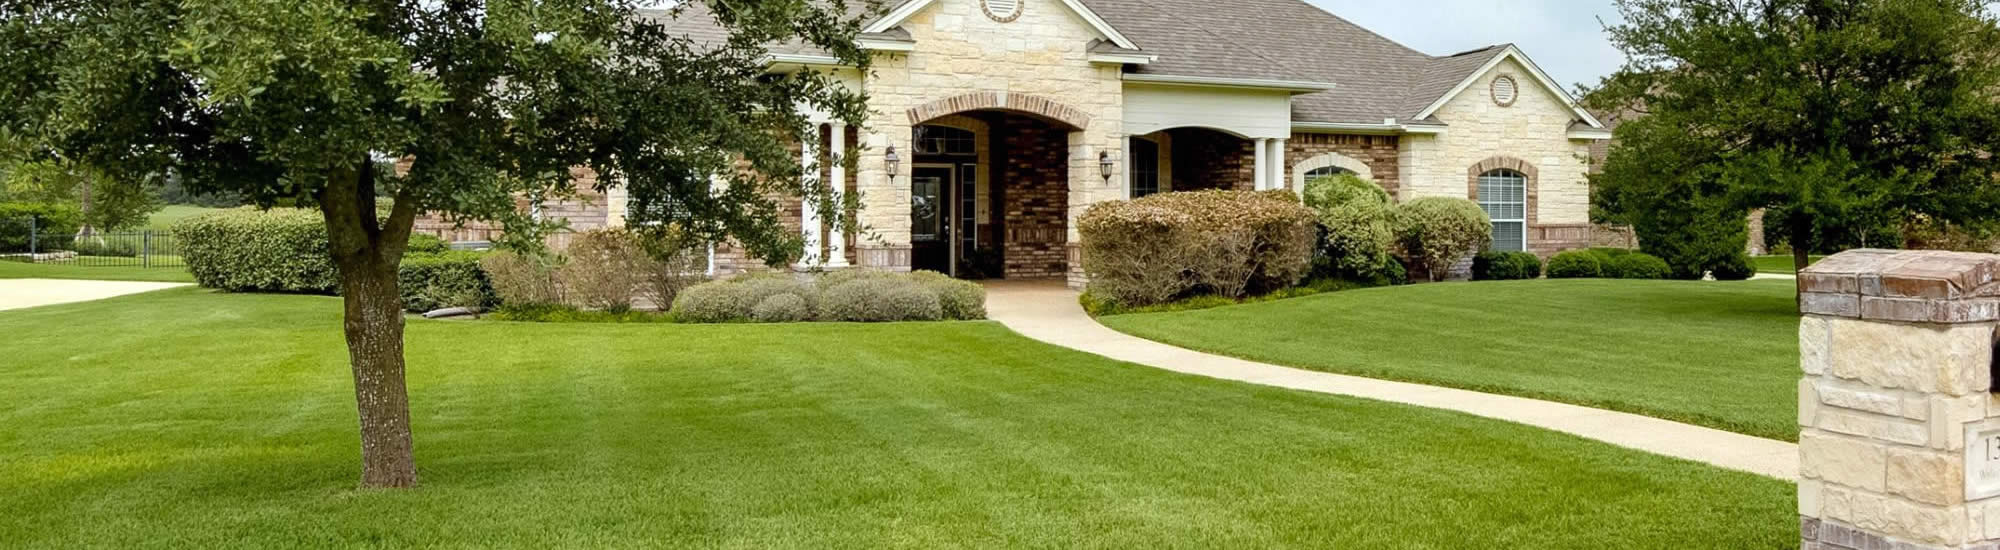 Lawn Care Landscaping Services Pennsylvania